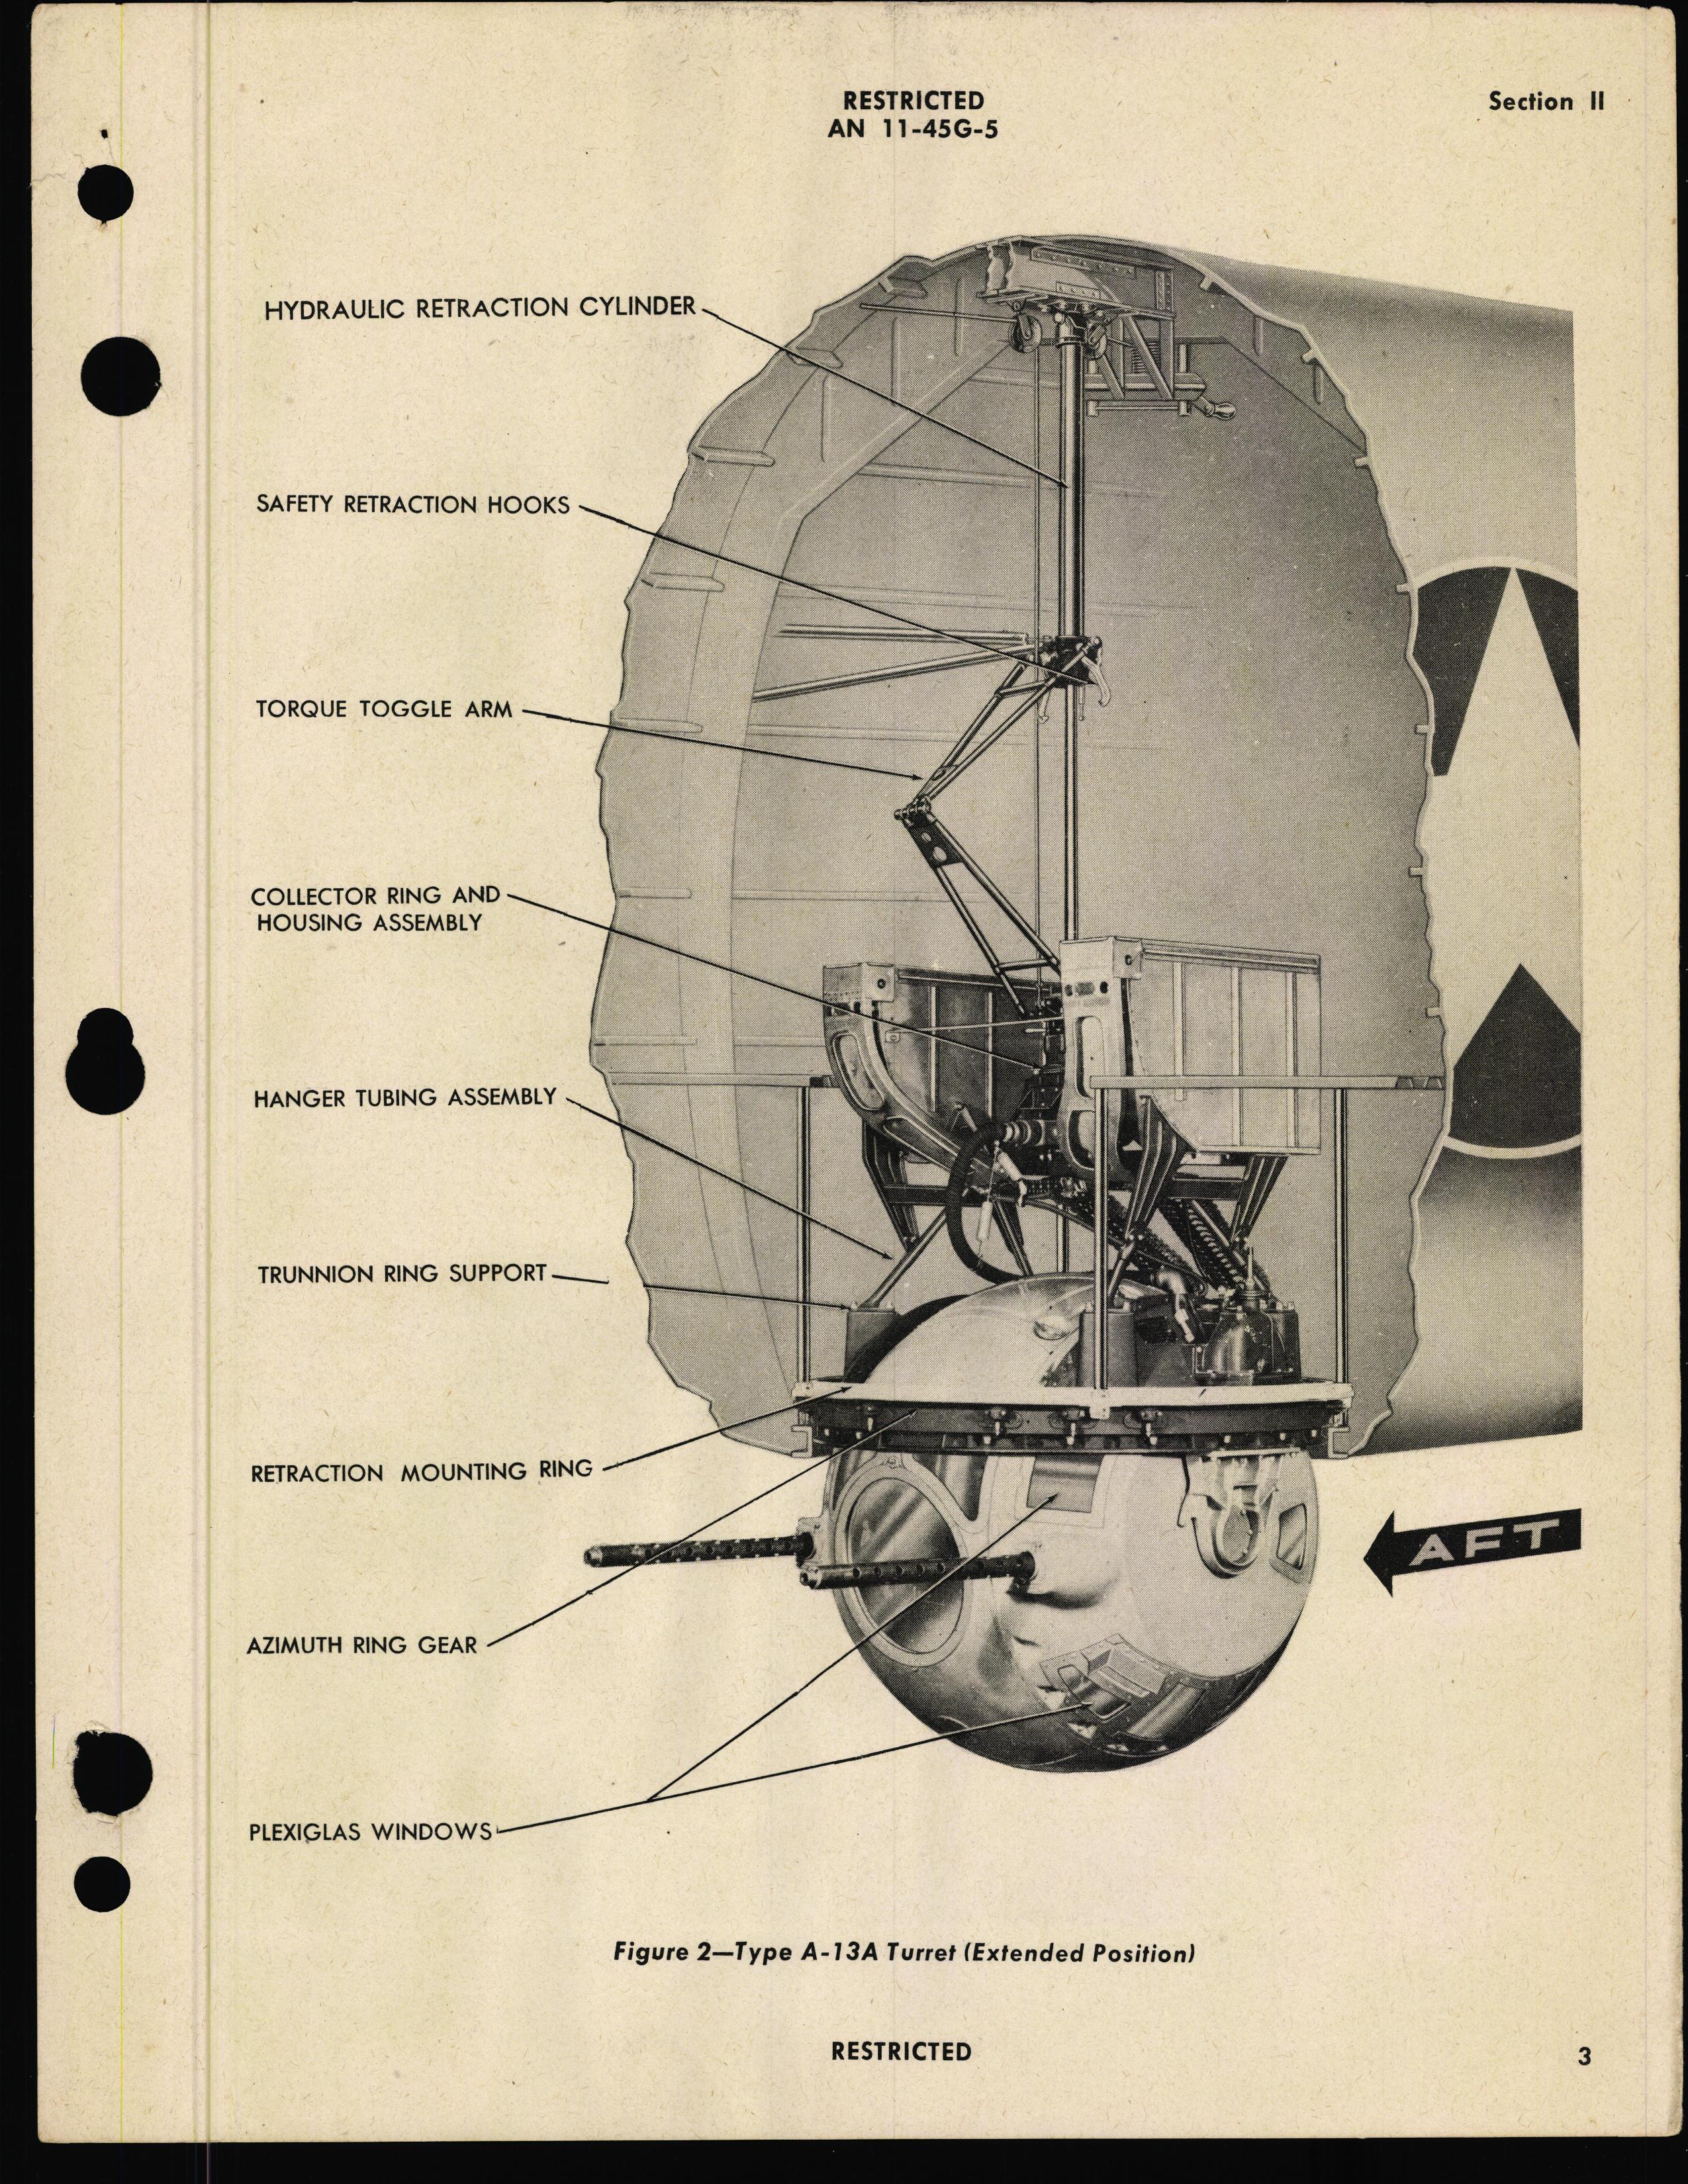 Sample page 7 from AirCorps Library document: Handbook of Instruction with Parts Catalog for Lower Ball Turrets